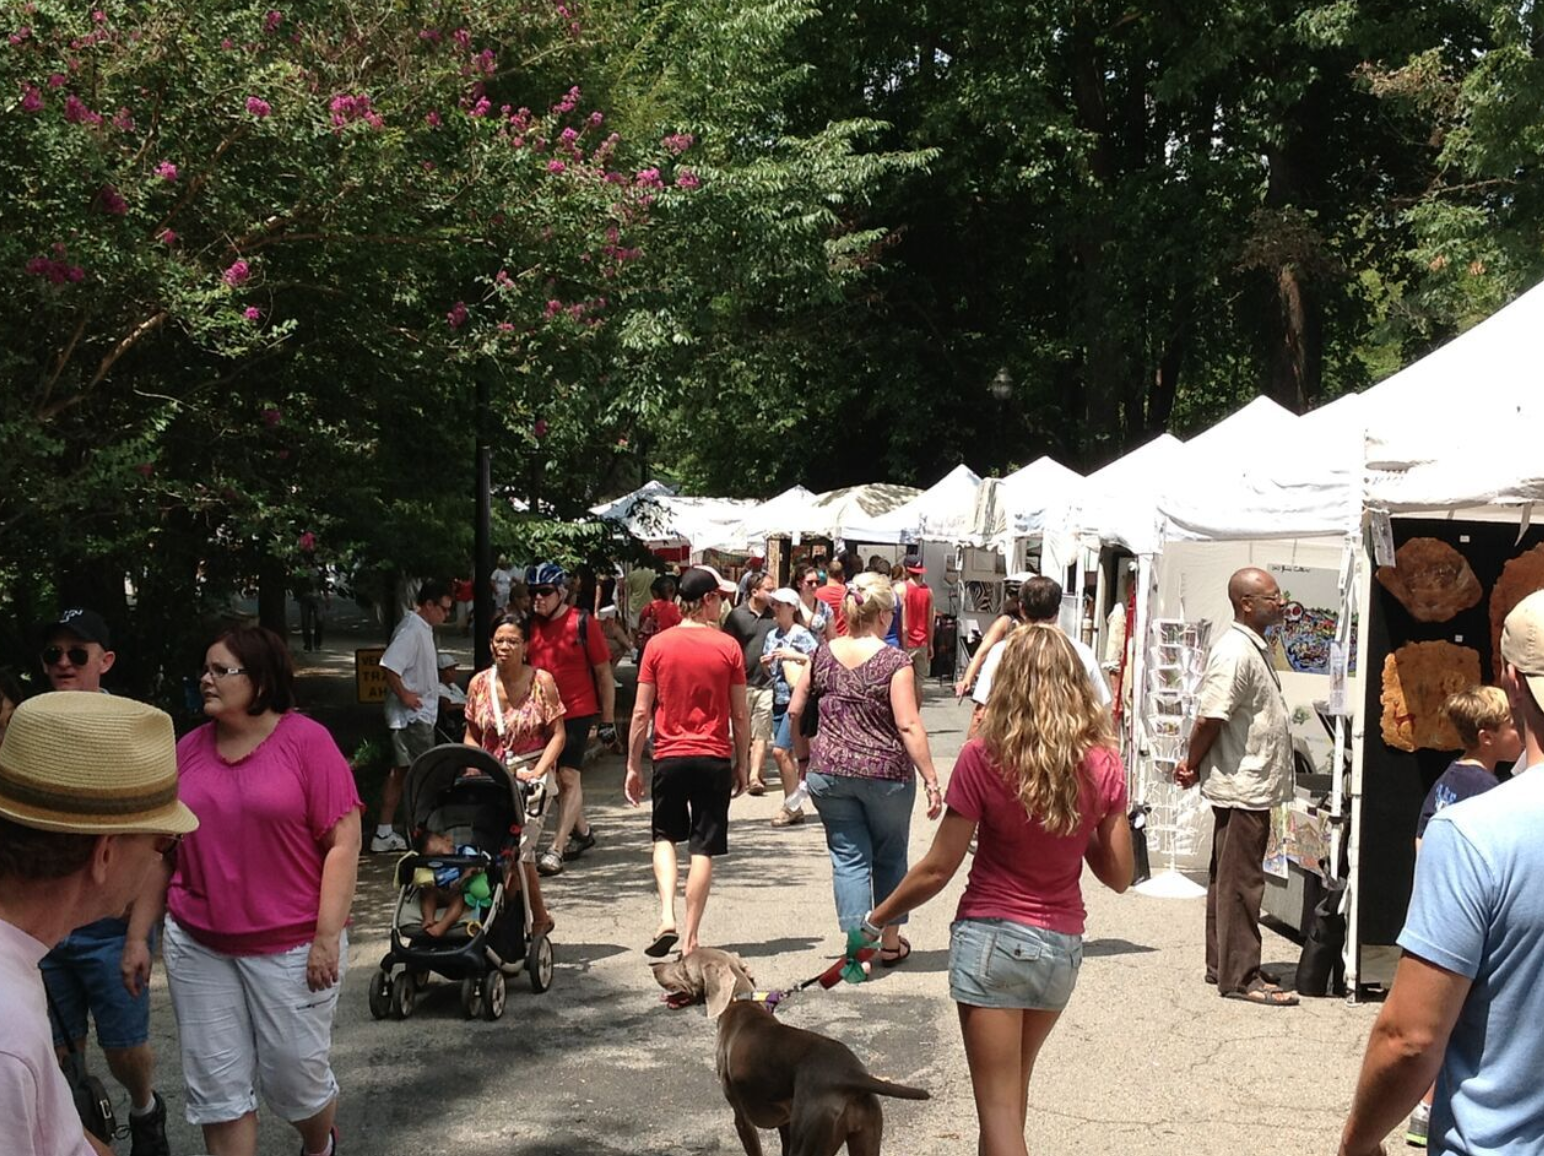 Have Fun in the Summer Sun at AFFPS’ Annual Arts Festivals